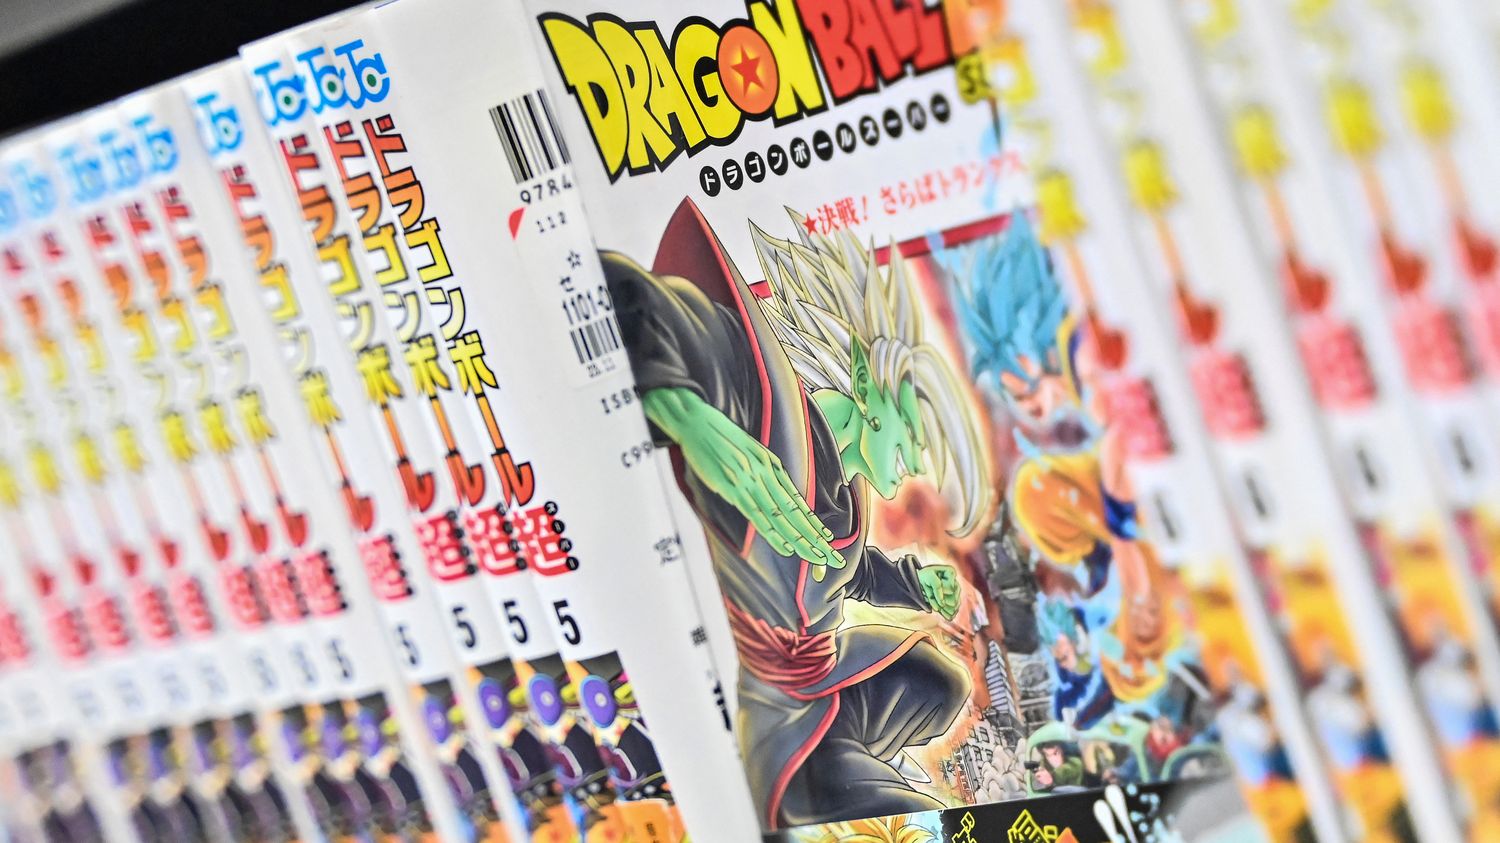 Saudi Arabia is building the first amusement park inspired by the Dragon Ball manga